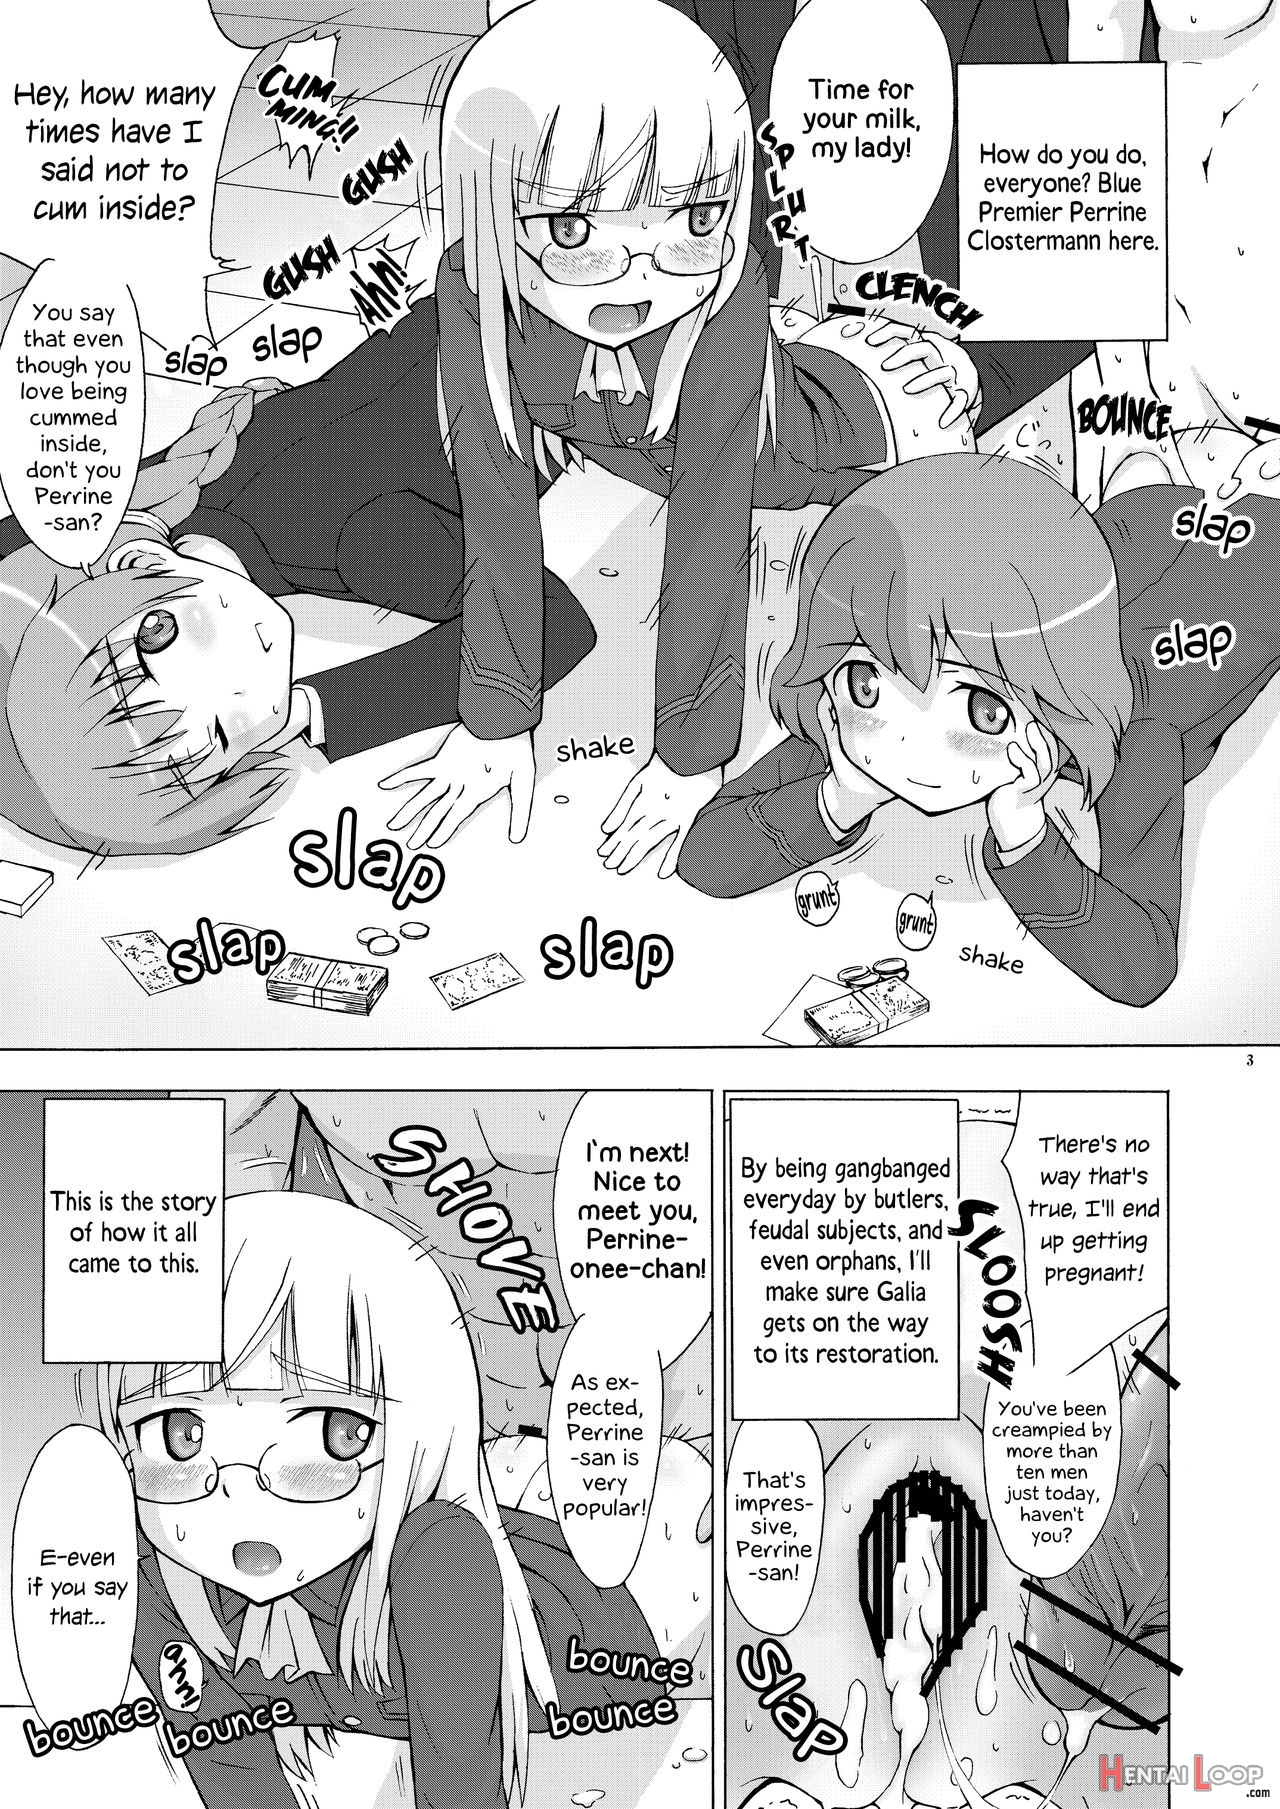 Trouble Of Perrine's Parcel!! page 3